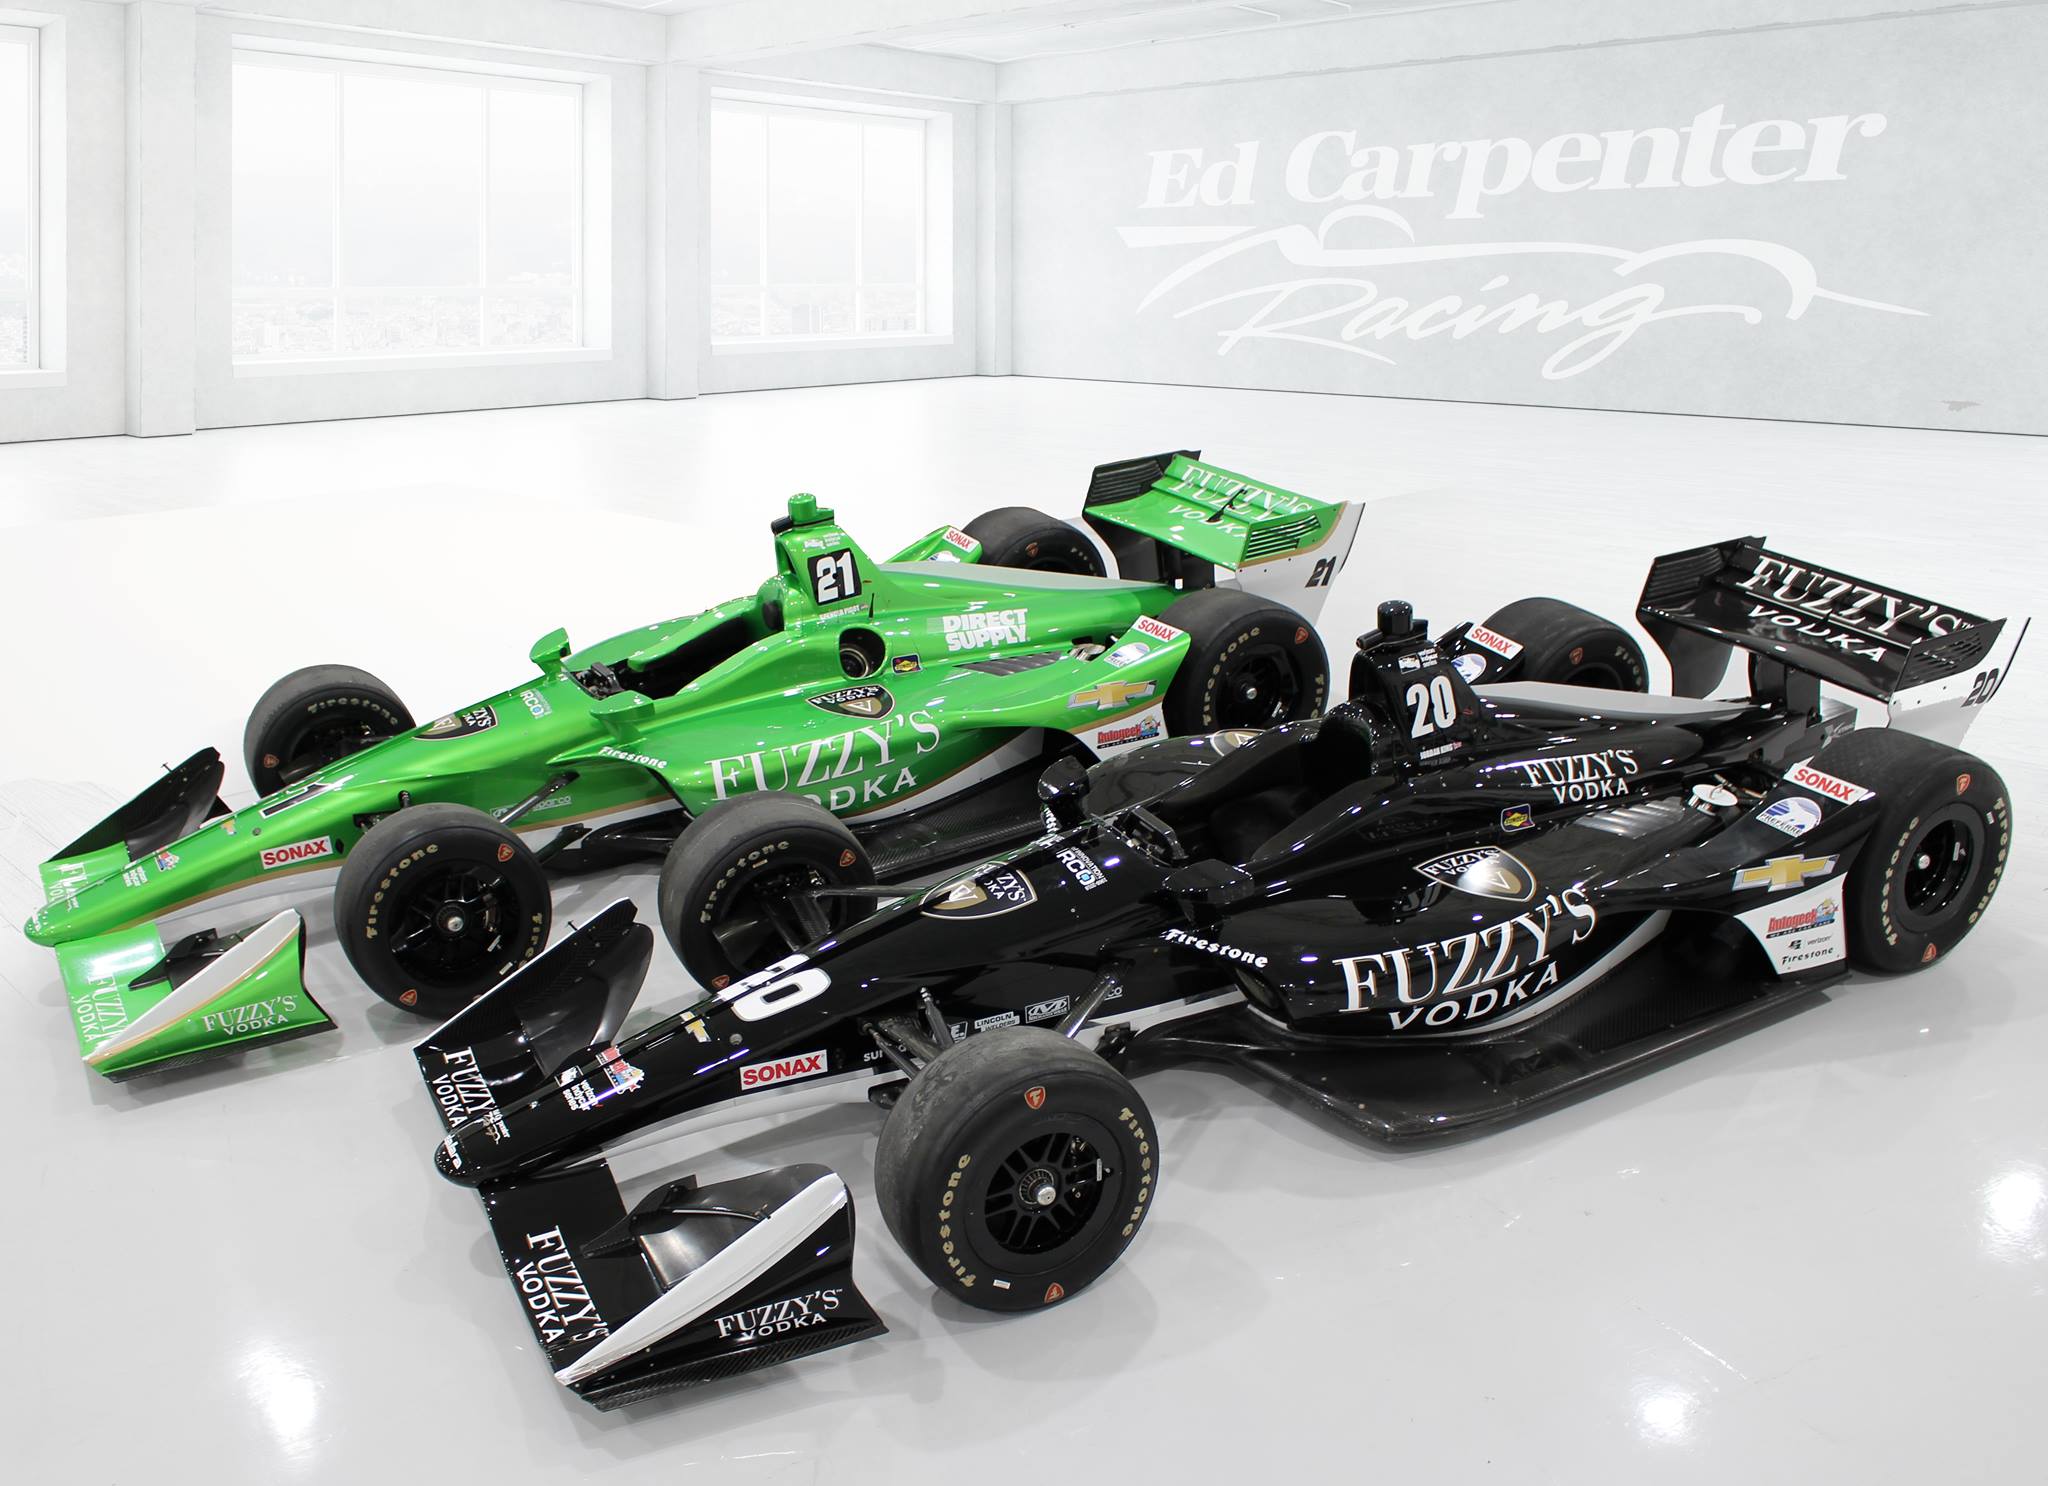 Meanwhile the two Fuzzy Vodka Ed Carpenter Racing cars ran with this livery